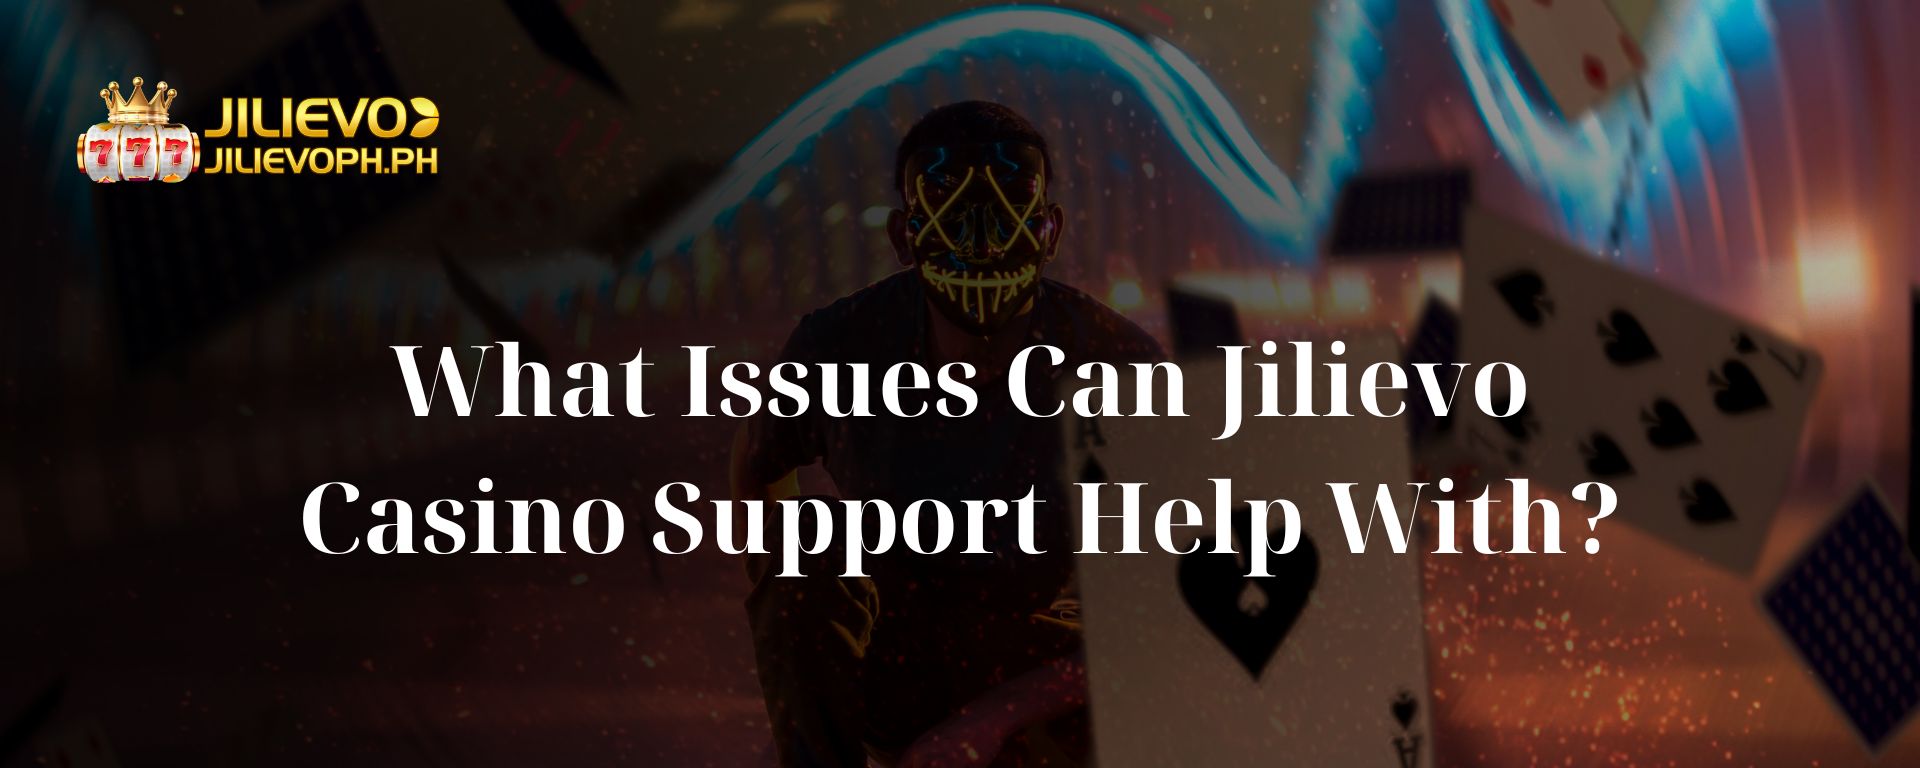 What Issues Can Jilievo Casino Support Help With?